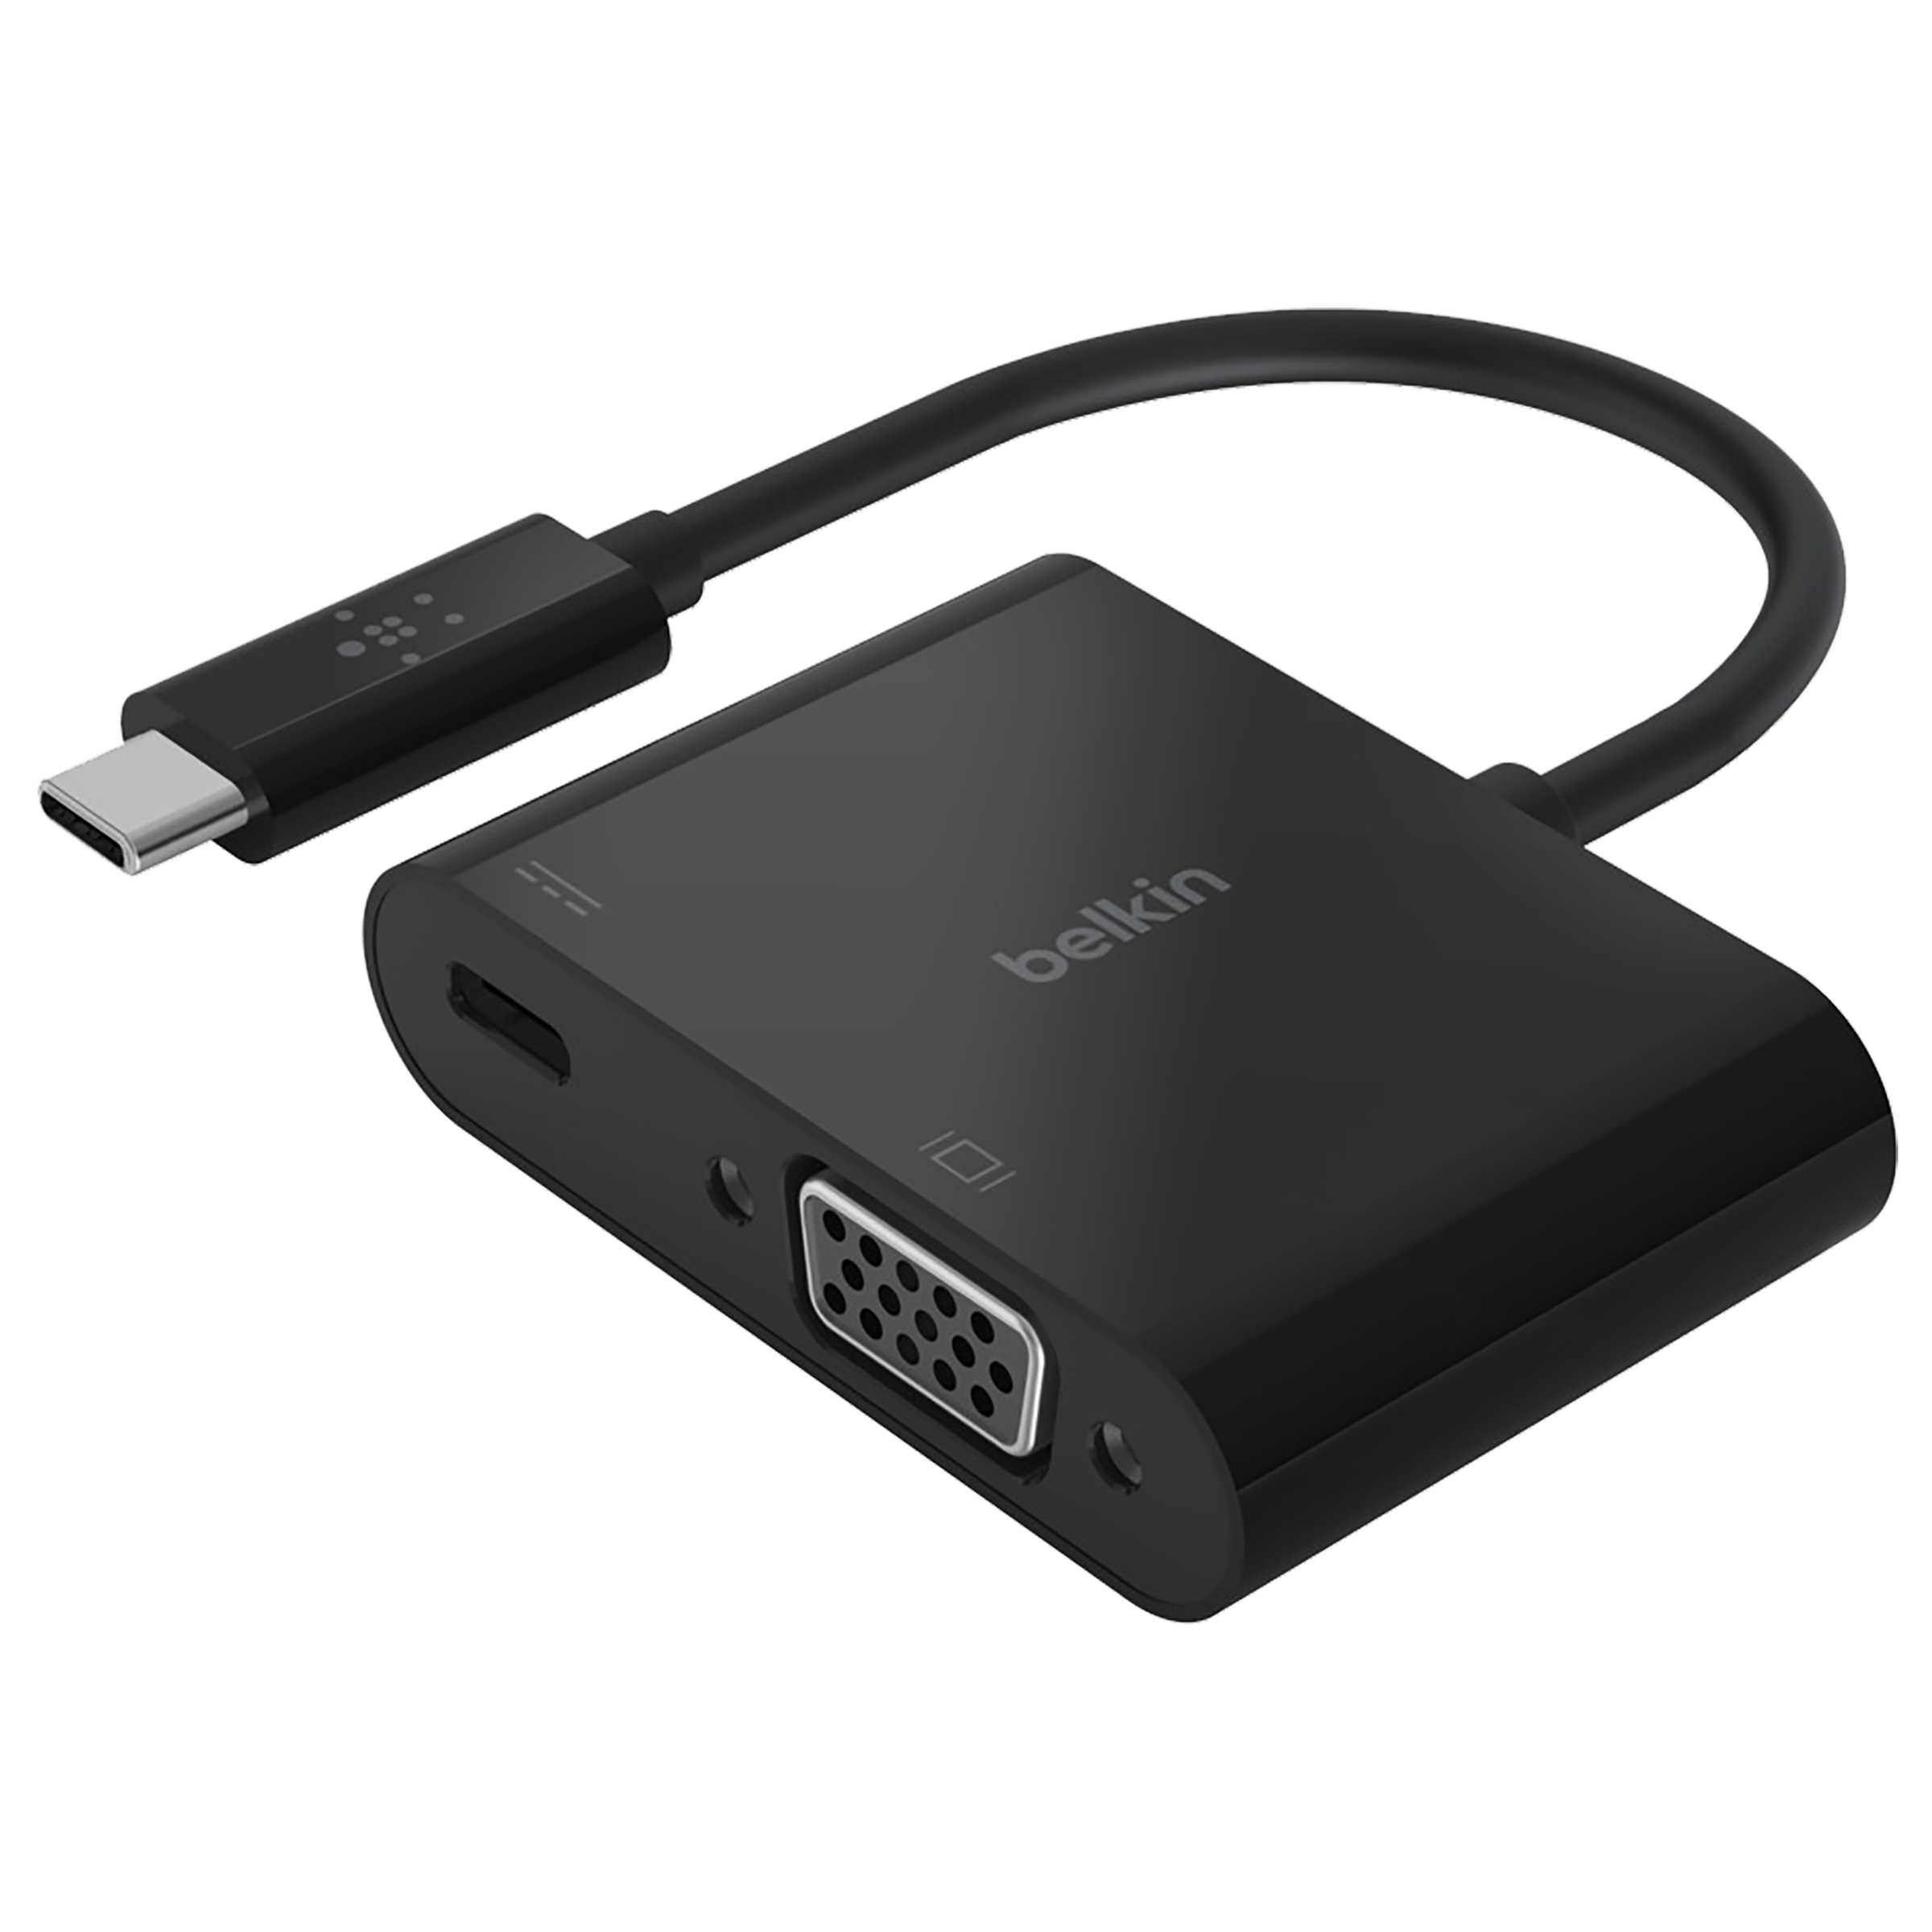 Belkin 13 Meter USB 2.0 (Type-C) to VGA Power/Charging VGA Cable (Supports HD 1080P Video Resolution, AVC001btBK, Black)_1